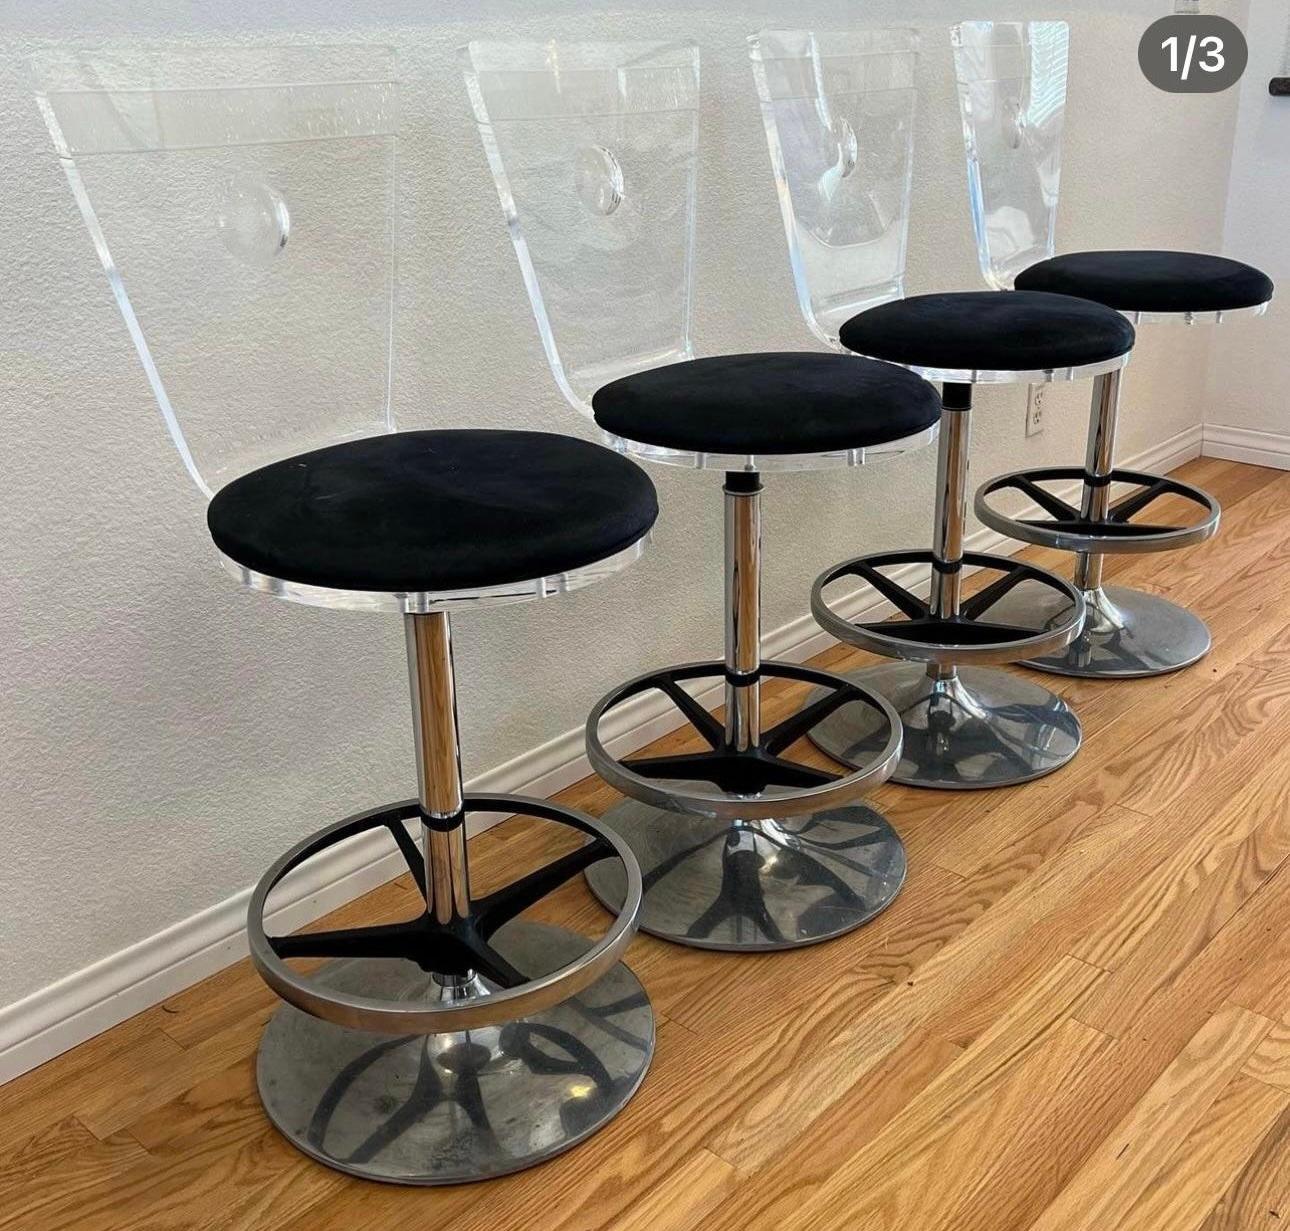 A set of 4 vintage lucite and chrome swivel stools by Hill manufacturing
Can separate them in pairs
Circa 1980's
Floor to top of the seat 25